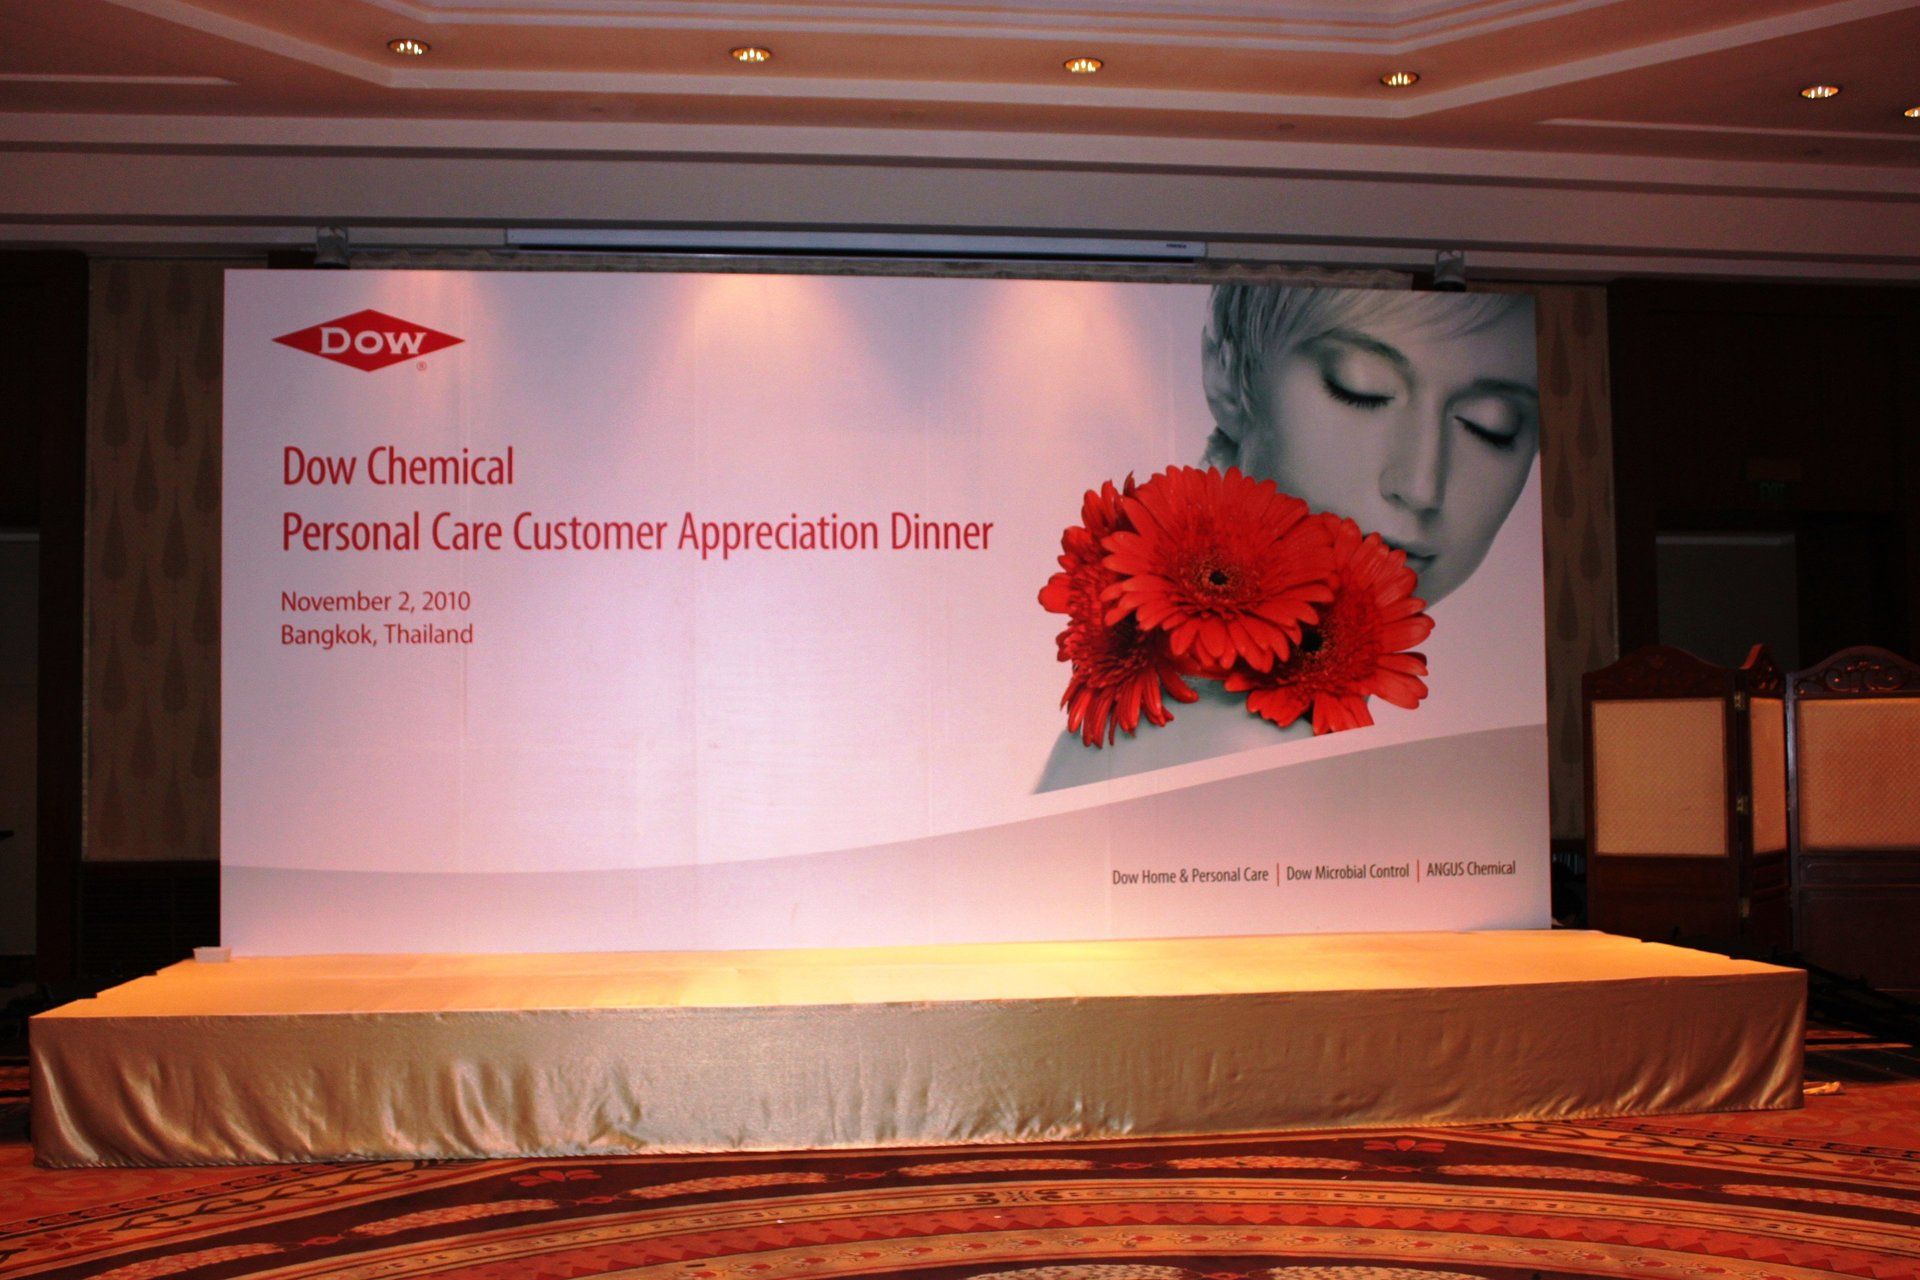 Dow Chemical @ Customer Appreciation Dinner. Designed and built by Essential Global Fairs.